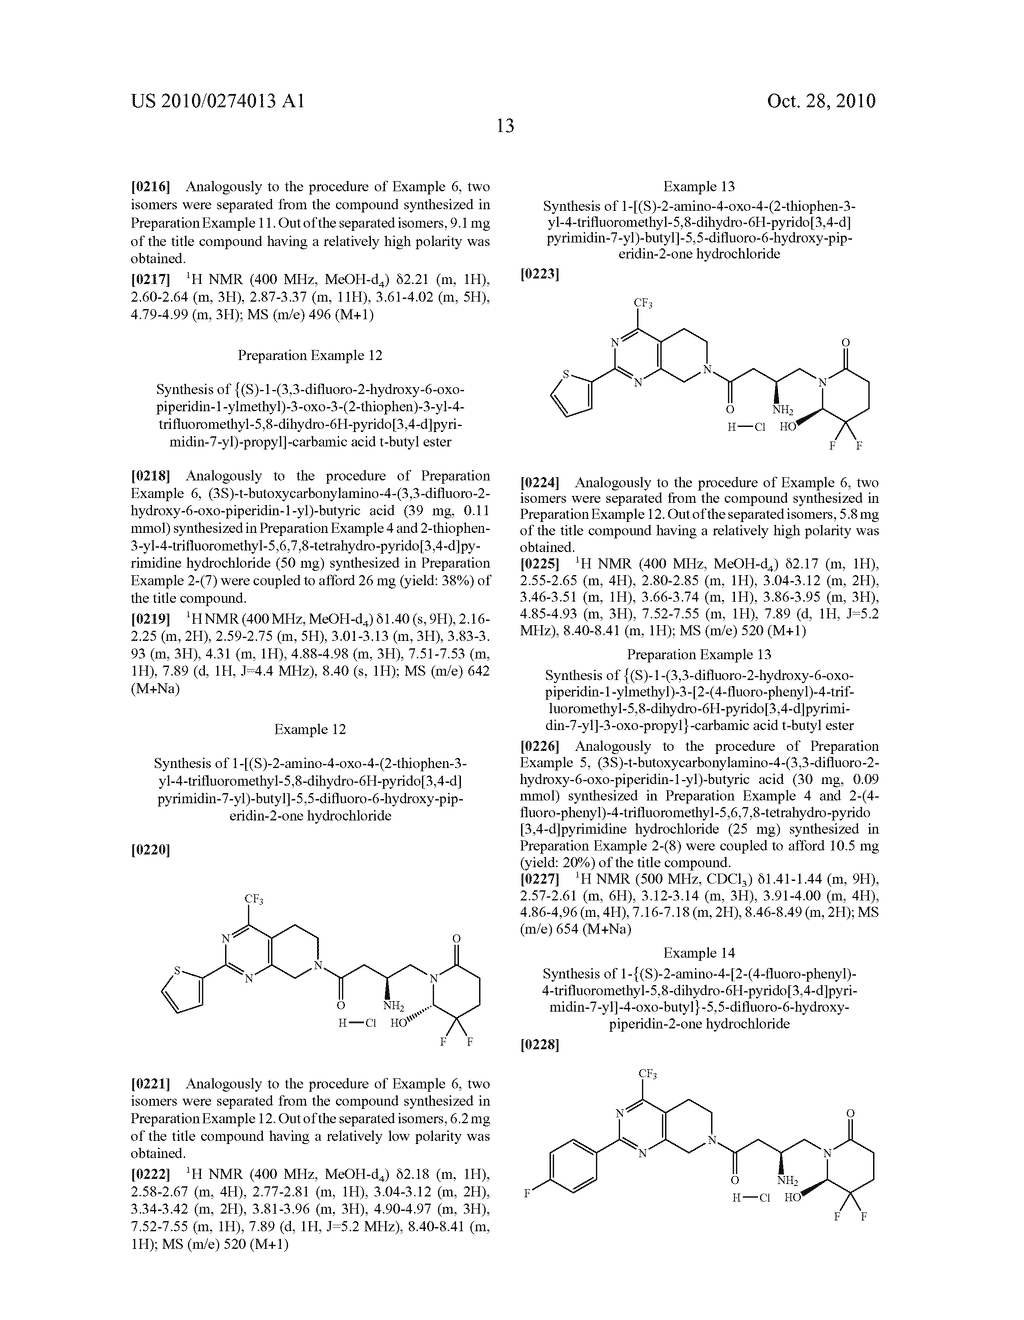 DIPEPTIDYL PEPTIDASE-IV INHIBITING COMPOUNDS, METHODS OF PREPARING THE SAME, AND PHARMACEUTICAL COMPOSITIONS CONTAINING THE SAME AS ACTIVE AGENT - diagram, schematic, and image 14